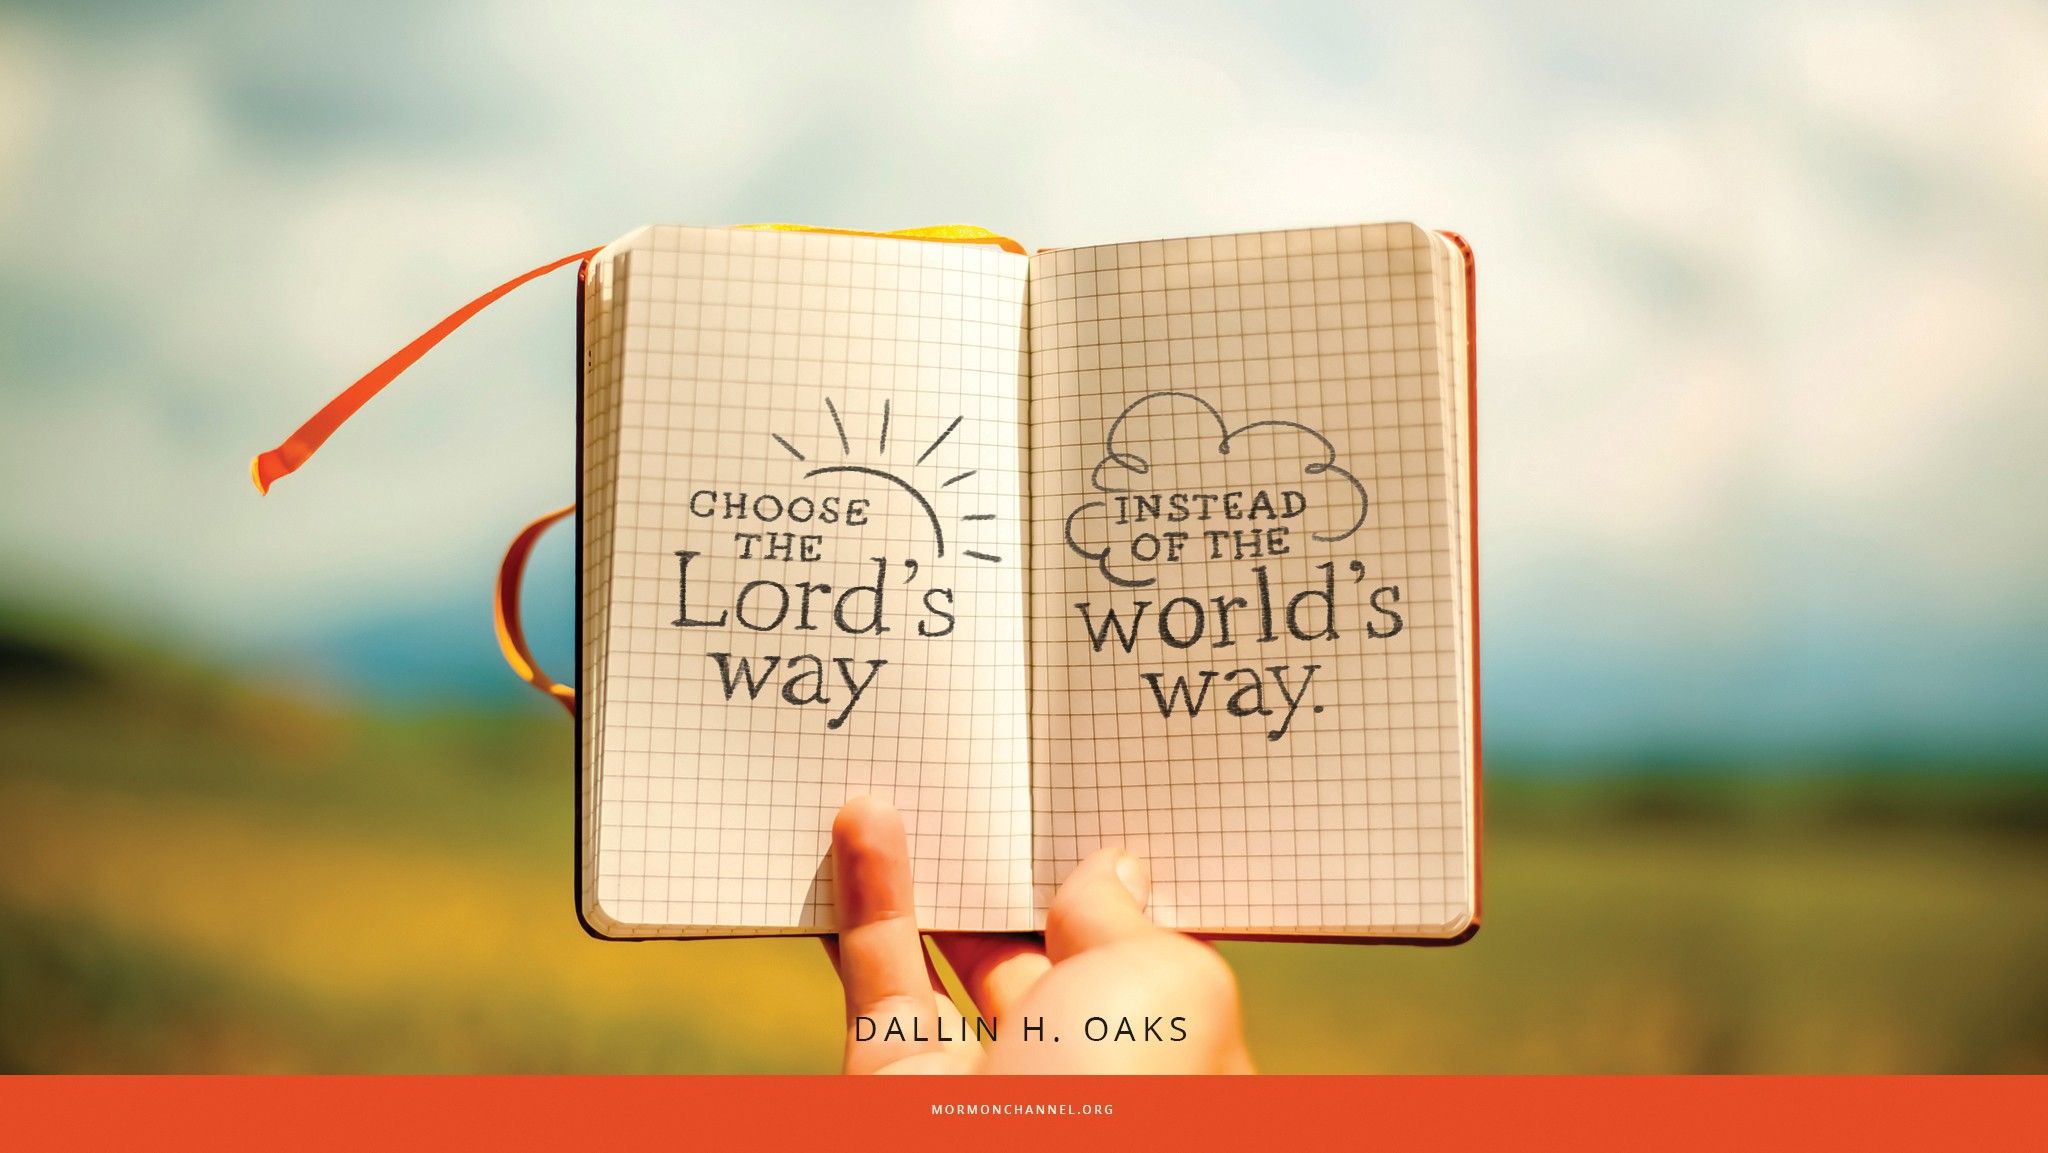 “Choose the Lord’s way instead of the world’s way.”—Elder Dallin H. Oaks, “The Plan and the Proclamation” © undefined ipCode 1.